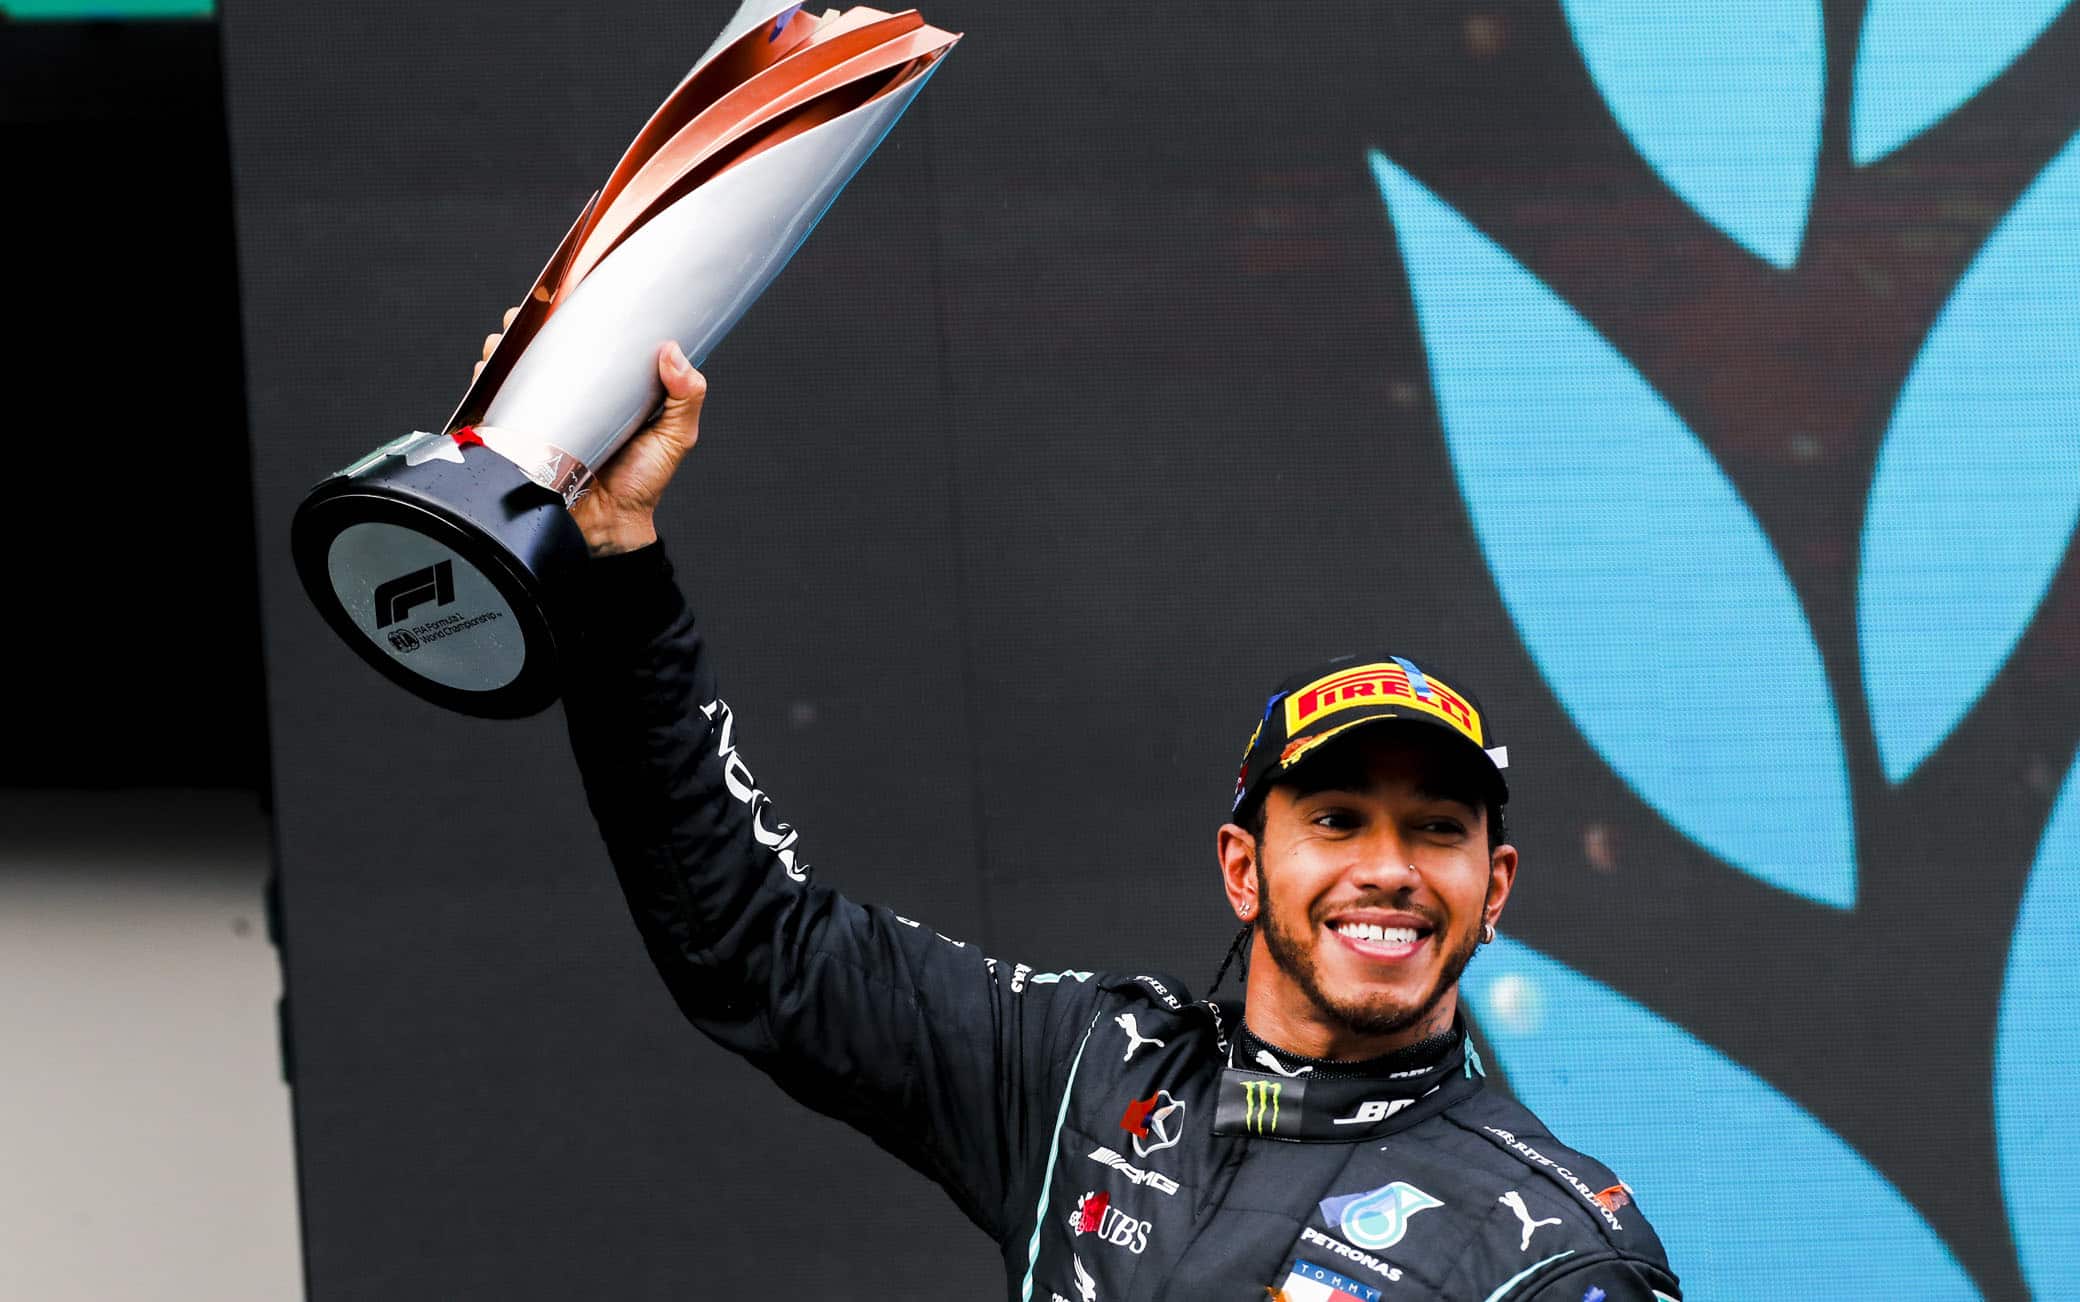 ISTANBUL PARK, TURKEY - NOVEMBER 15: Seven times world drivers champion Lewis Hamilton, Mercedes-AMG Petronas F1, 1st position, lifts his trophy on the podium during the Turkish GP at Istanbul Park on Sunday November 15, 2020, Turkey. (Photo by Steven Tee / LAT Images)